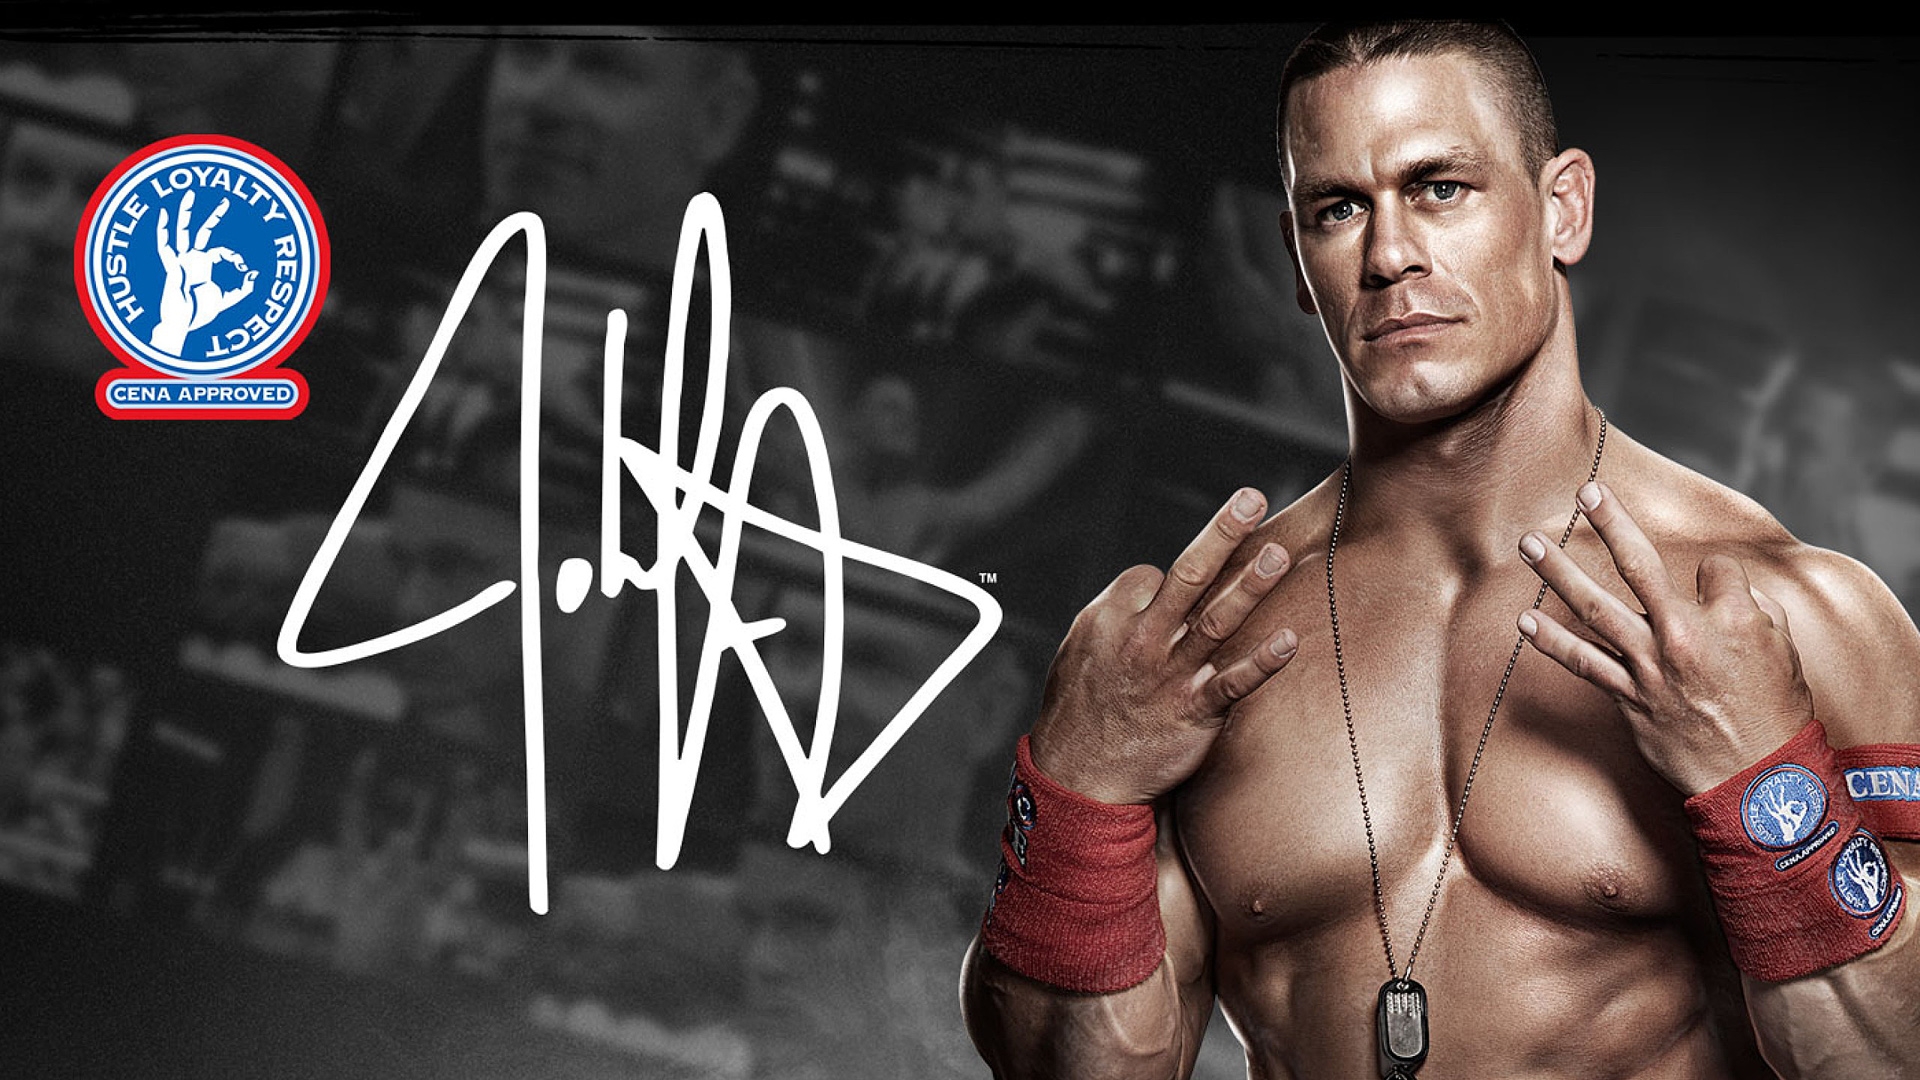 Cool Wwe HD Wallpaper Sports Picture Modern House